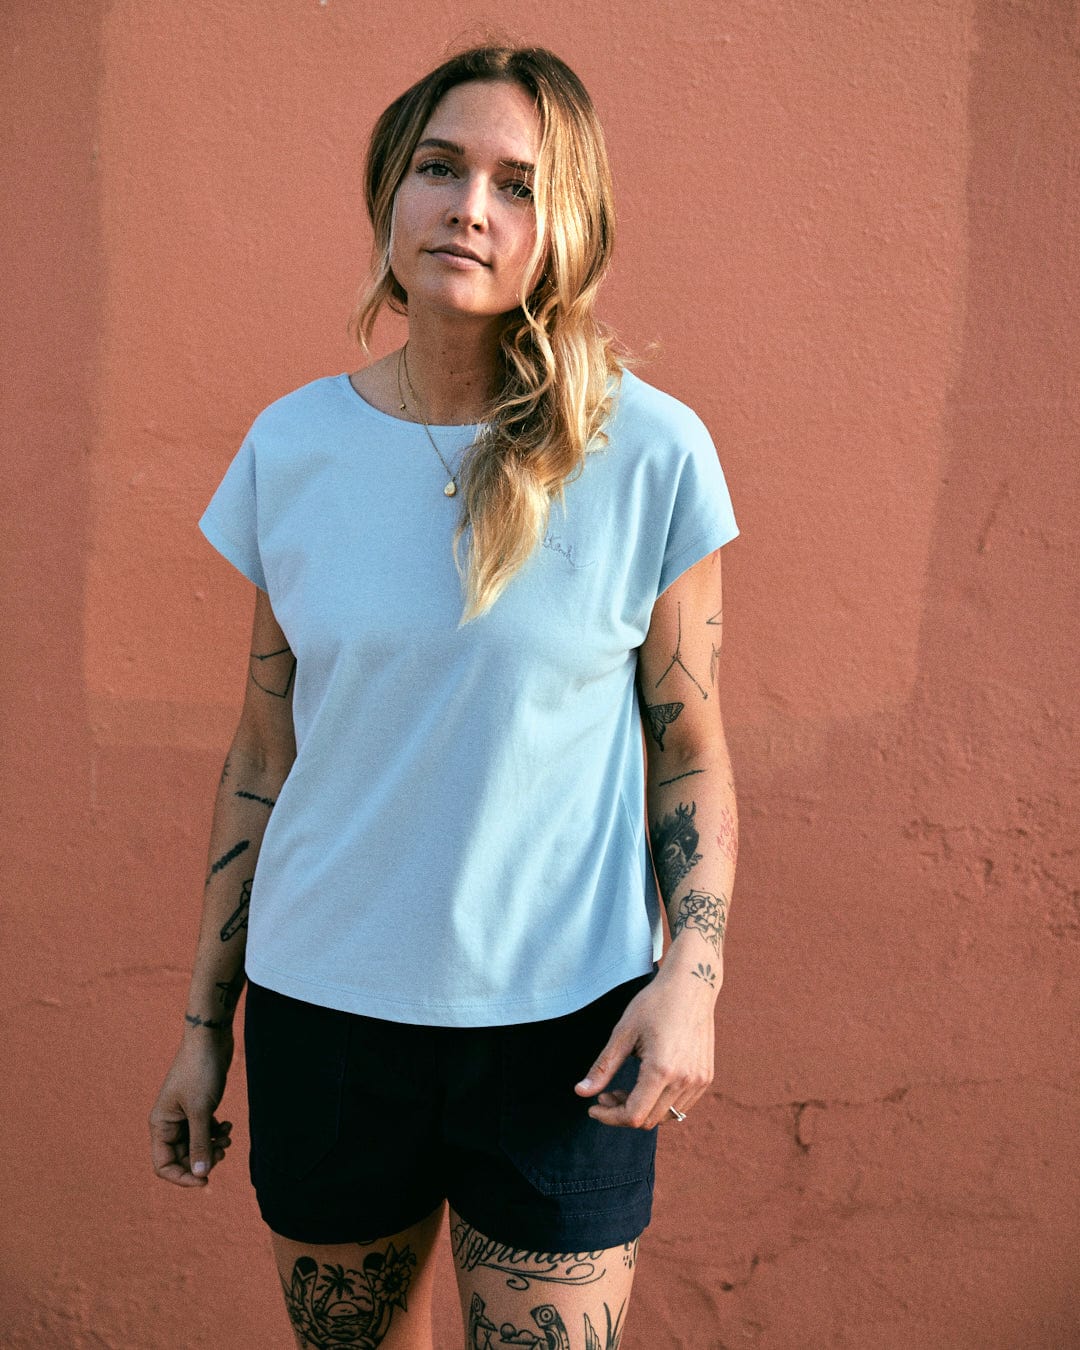 A person with long hair stands against a pink wall wearing a light blue, 100% cotton Saltrock Rhoda - Womens T-Shirt with dropped back detail and dark shorts, revealing tattoos on their arms and legs.